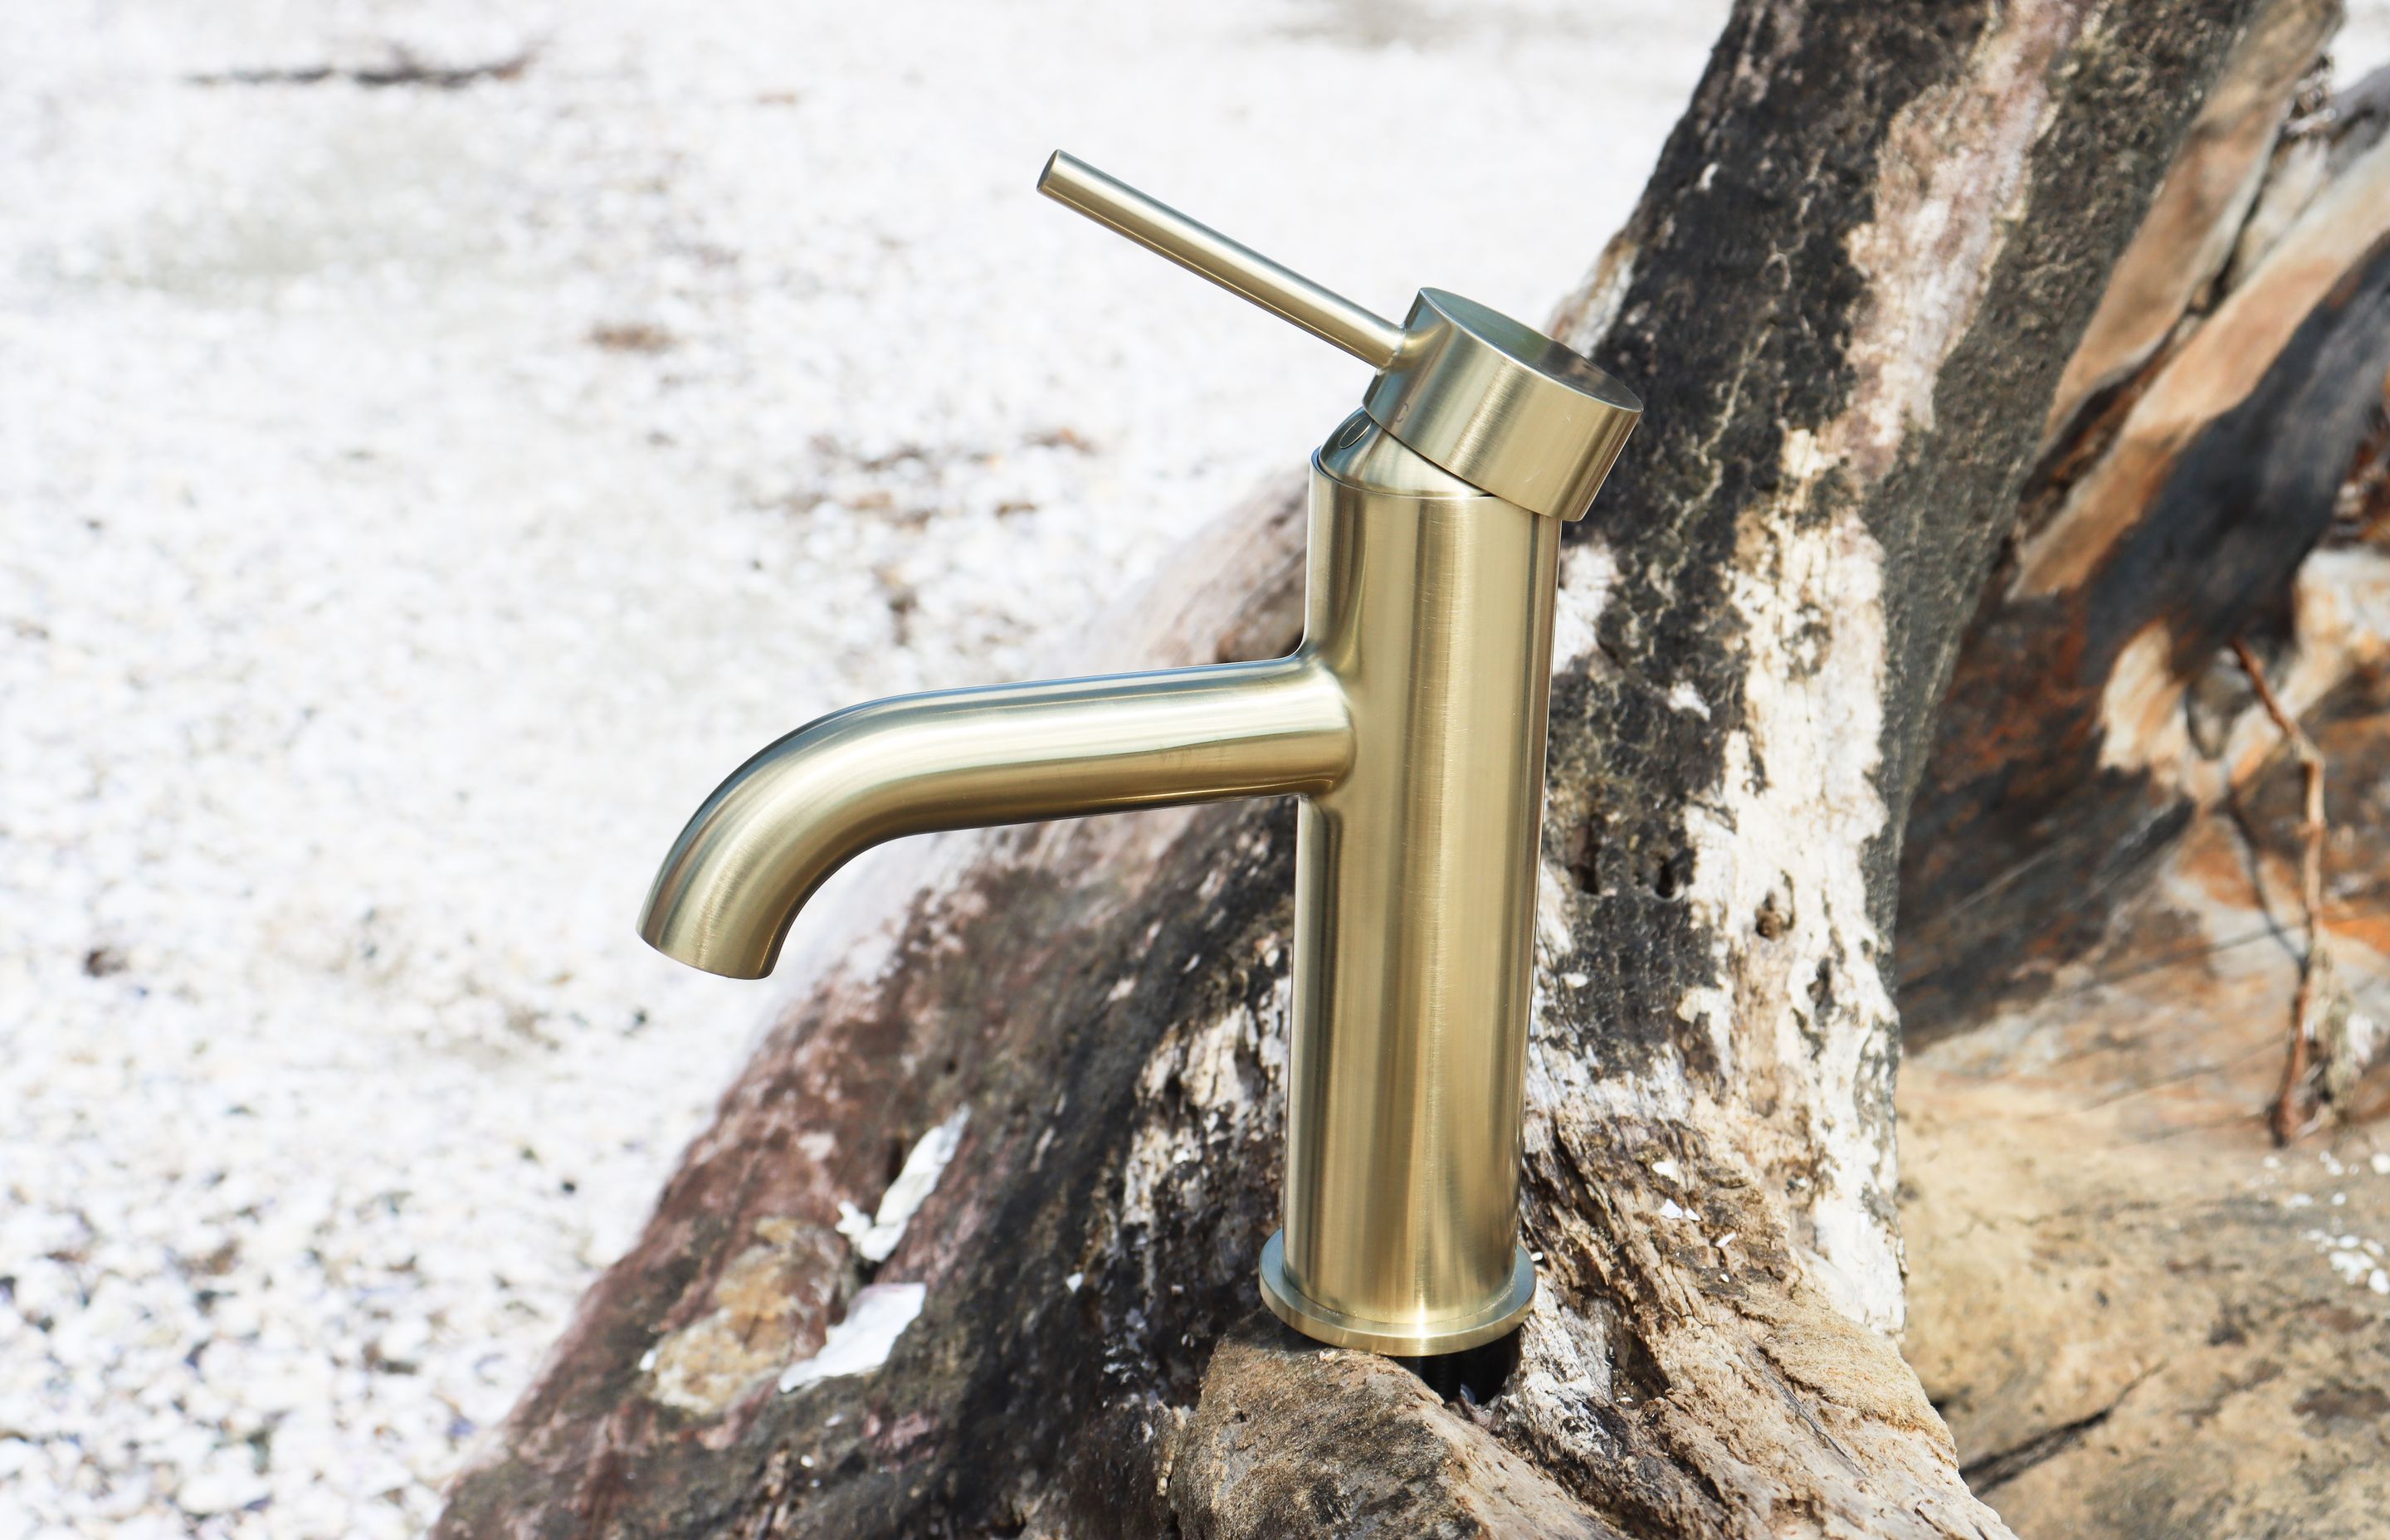 “PVD finishes offer unmatched durability, maintaining the tapware’s beauty for years,” says Martinac.